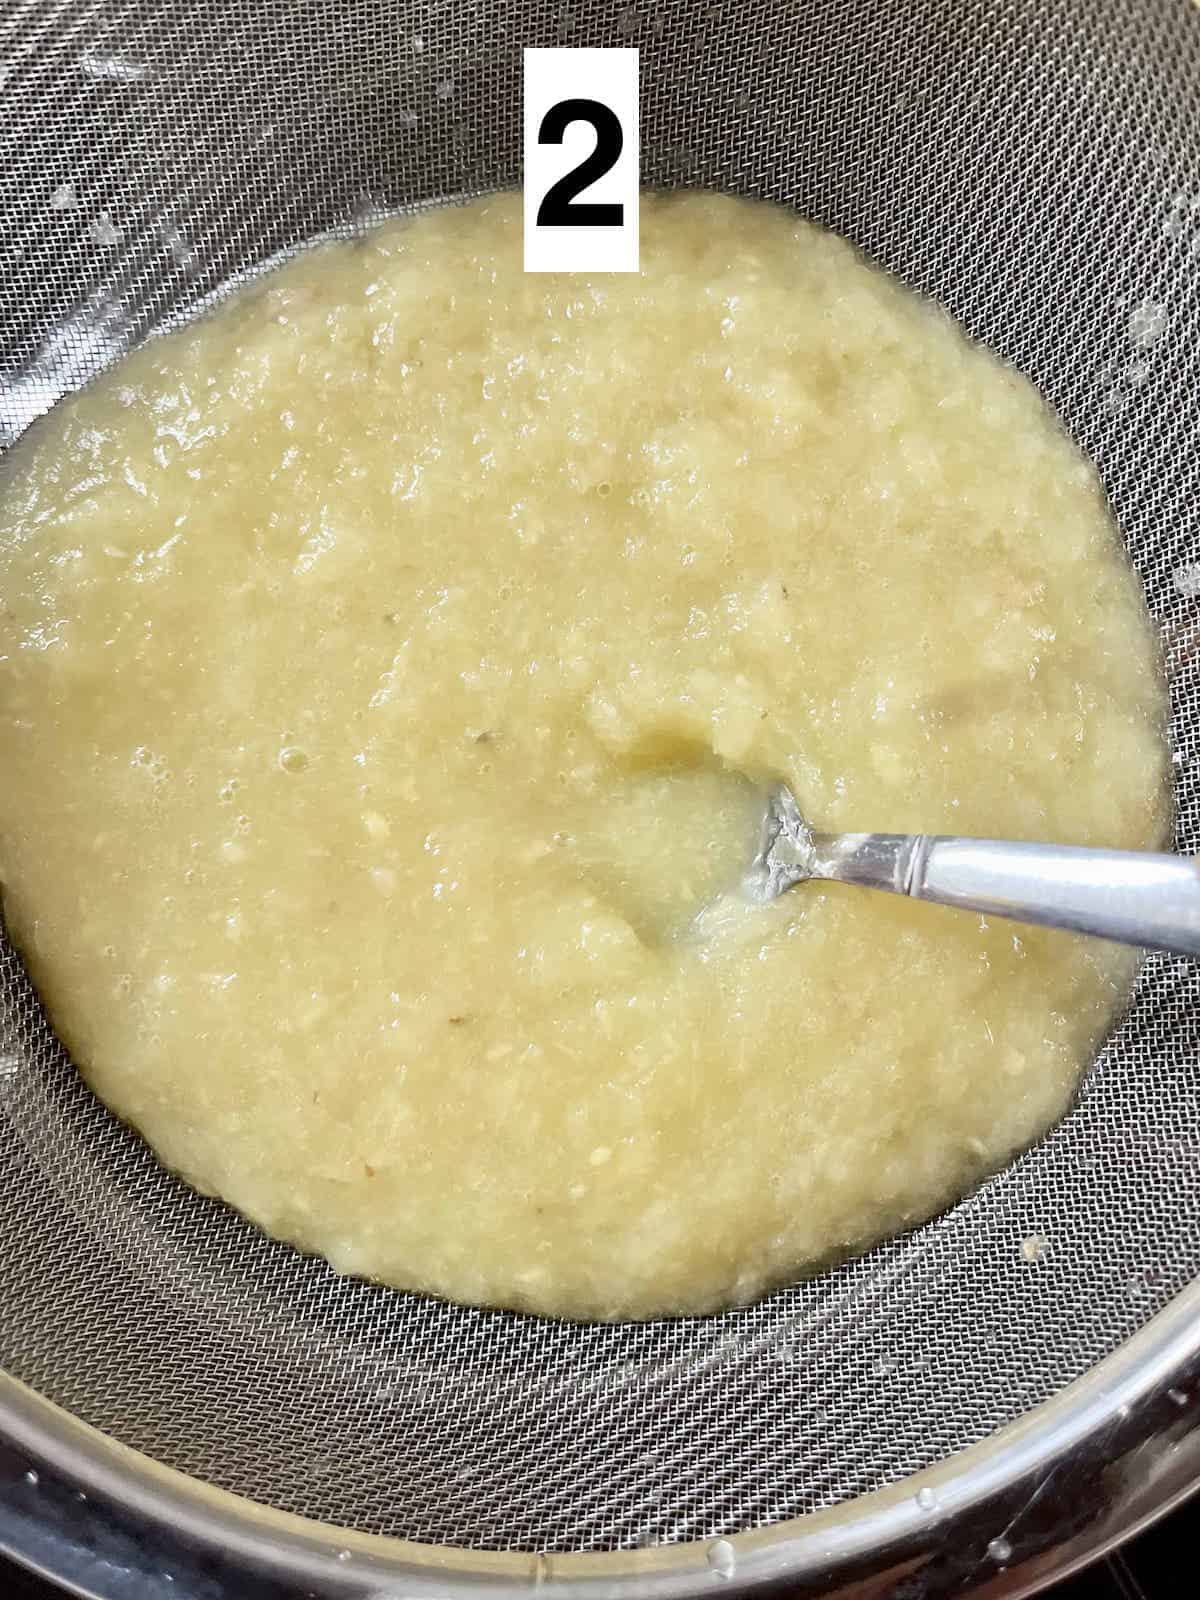 Straining blended pineapple and ginger through a metal sieve.